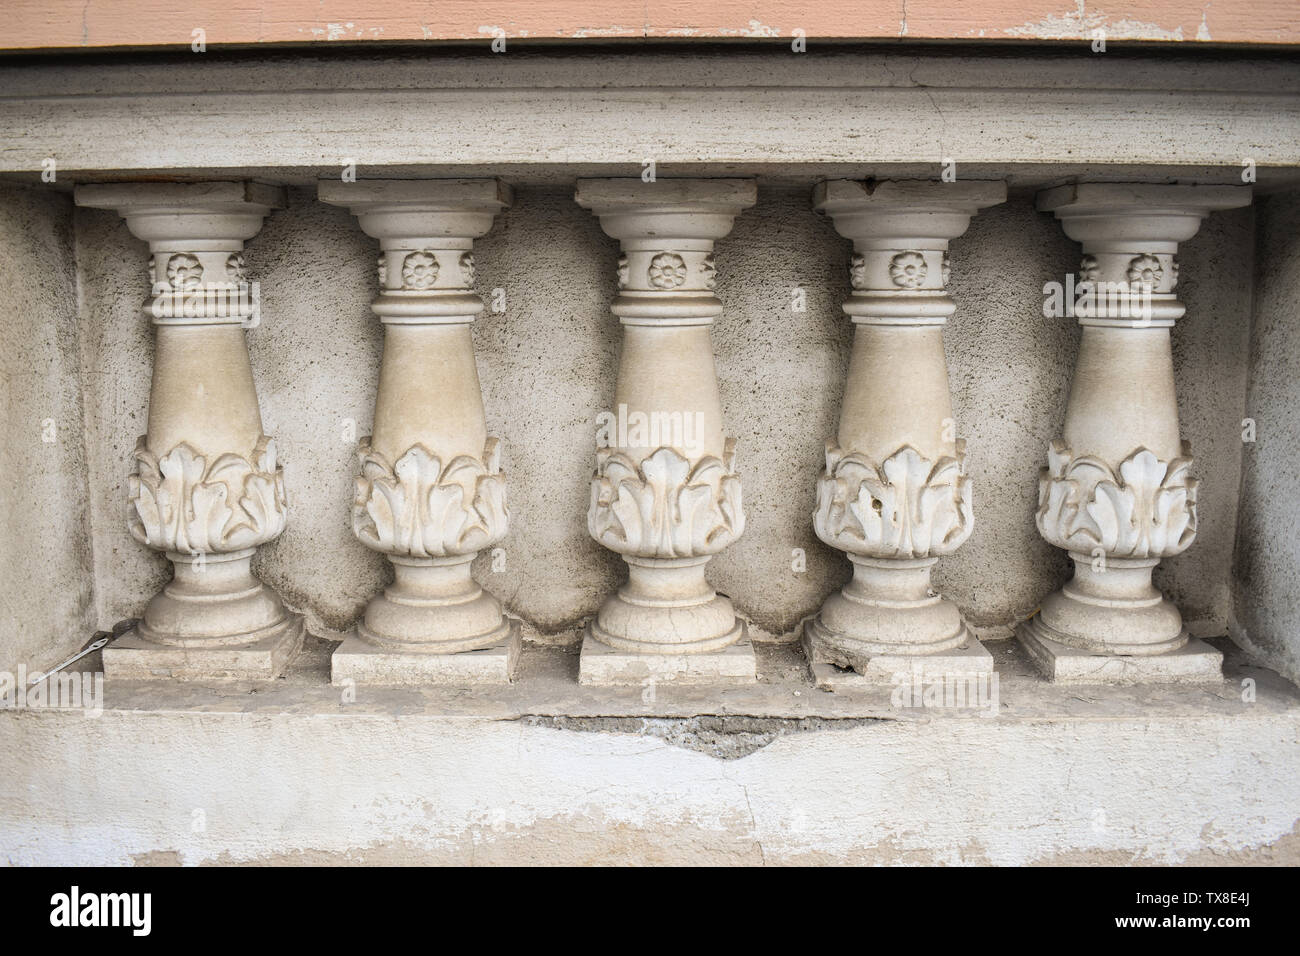 Neo classical architecture details on the old building. Stone sculpted pillars on the balcony facade. Stock Photo